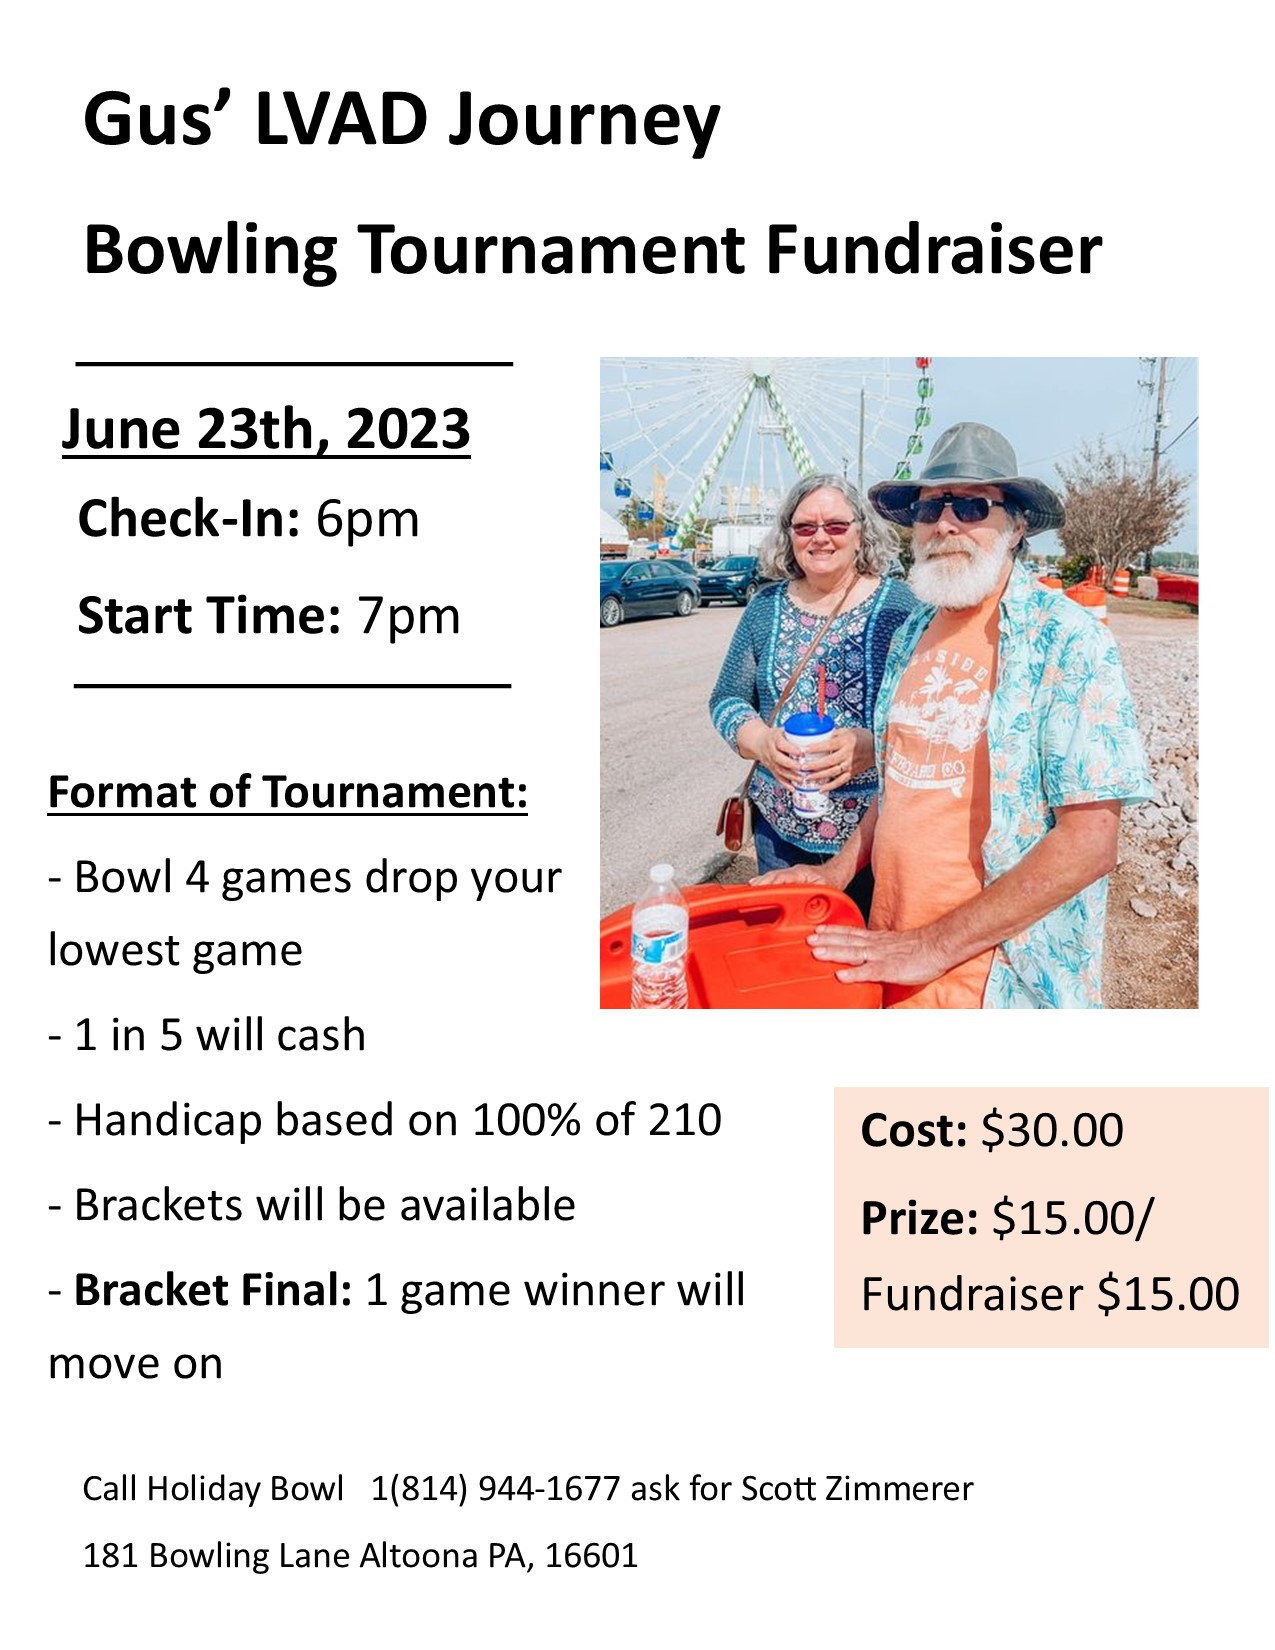 Gus' LVAD Journey Bowling Tournament Fundraiser